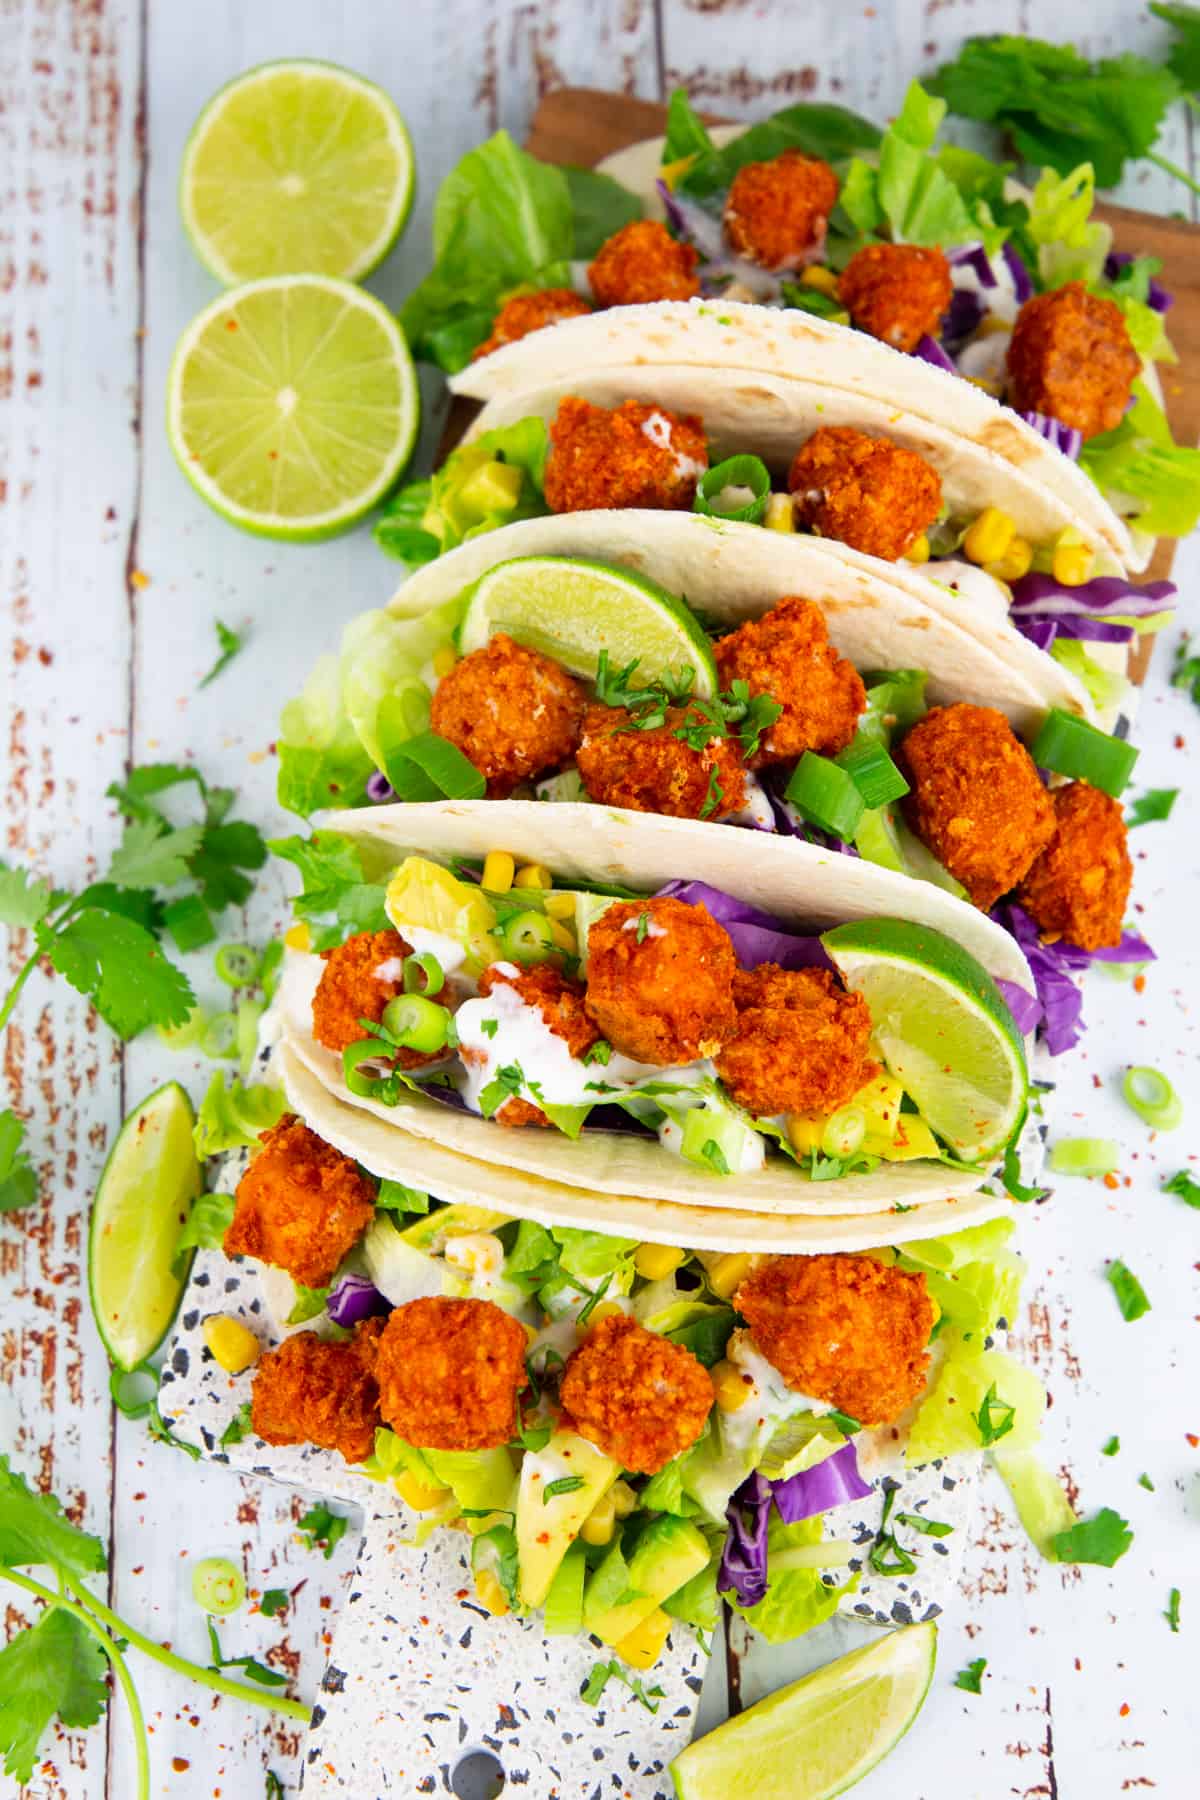 tacos filled with baked tofu cubes, lettuce, and avocado on a wooden board with limes on the side